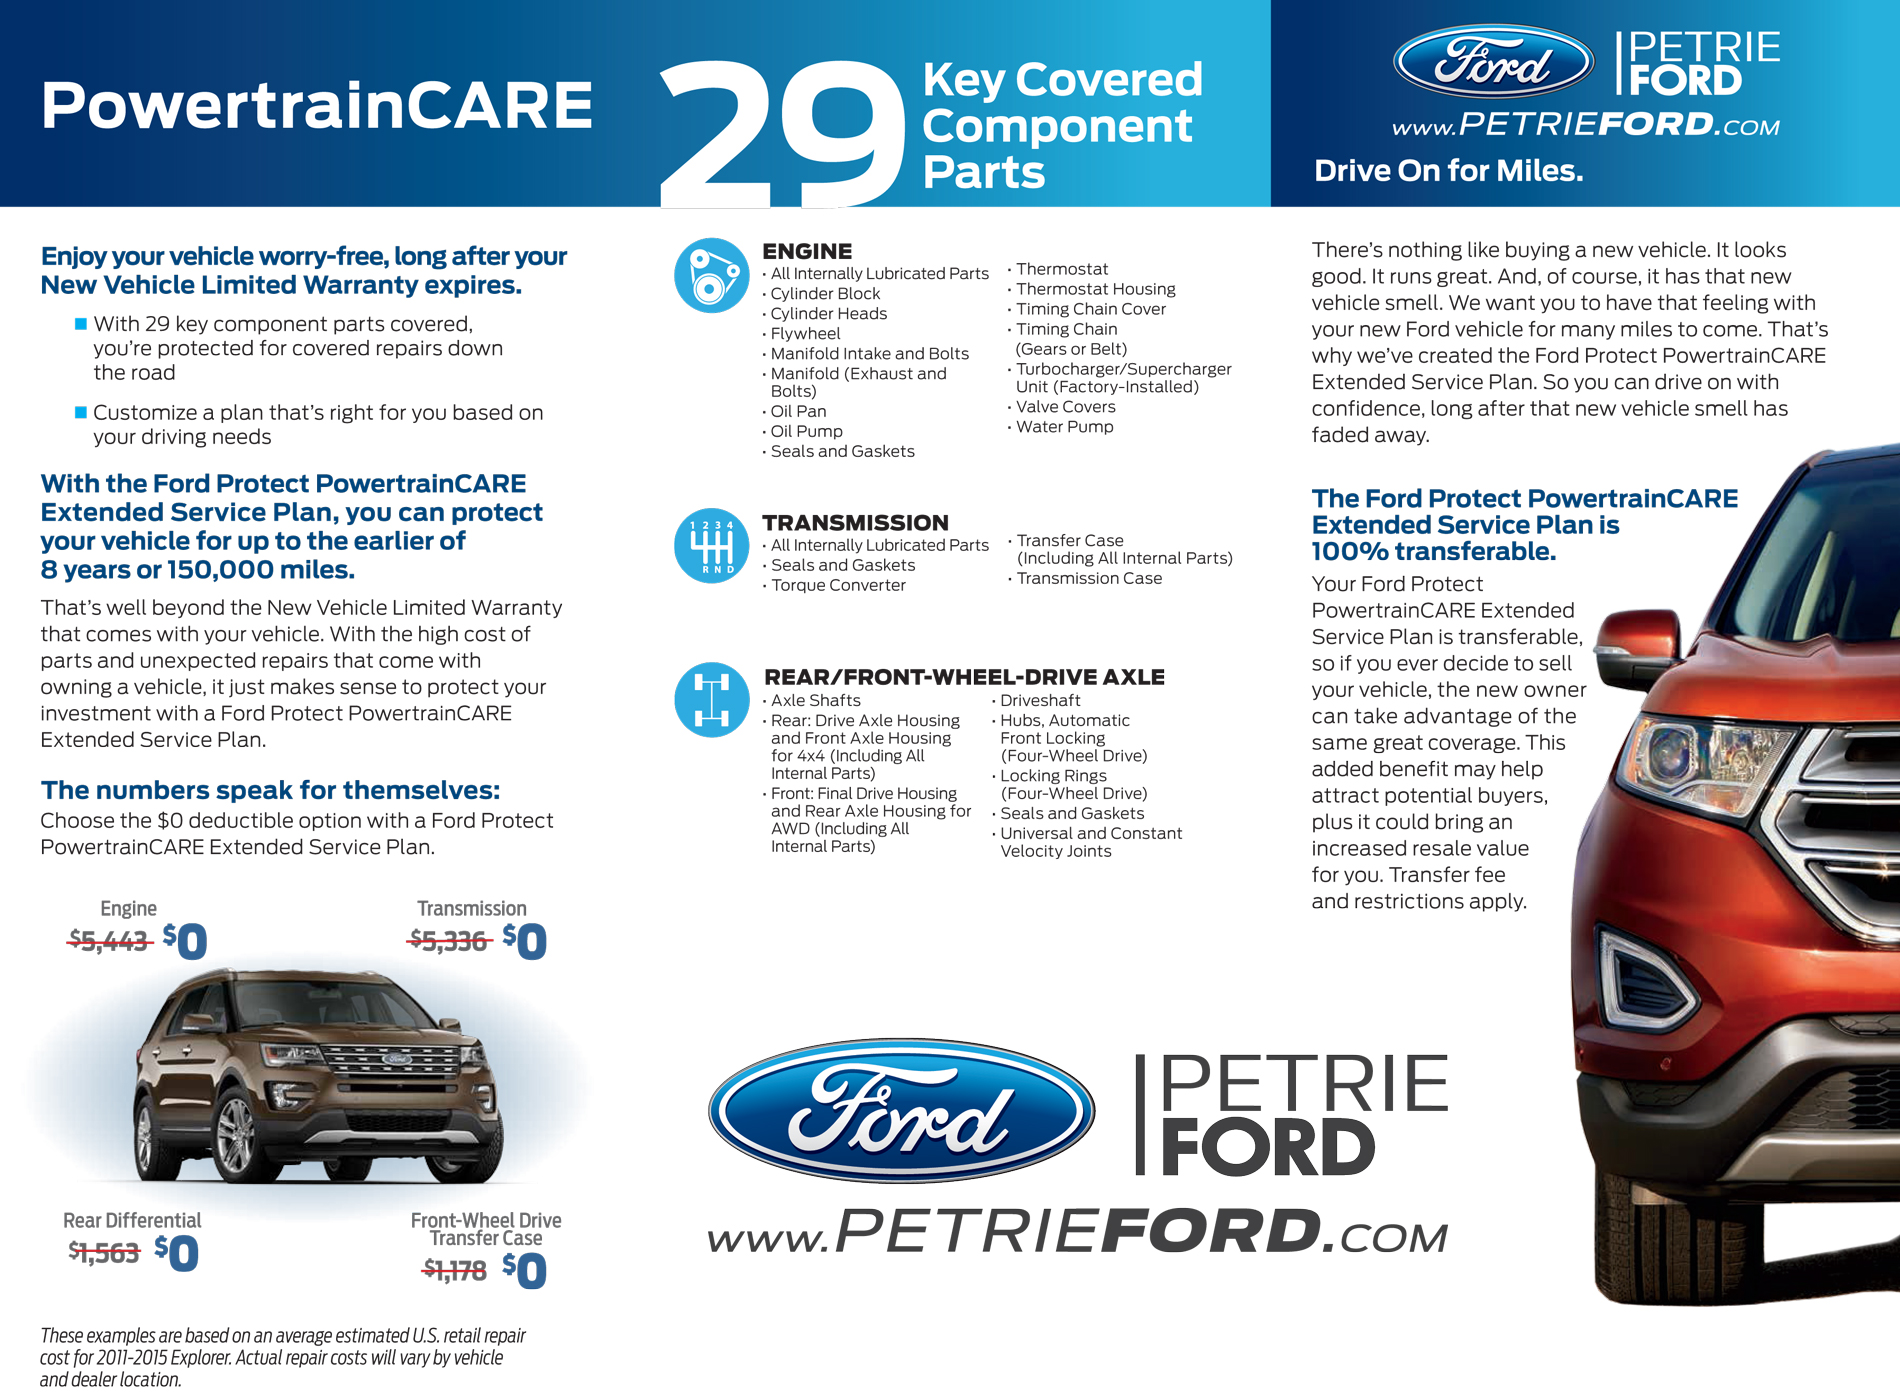 ford-canada-esp-extended-warranty-service-powertrain-care-plan-cost-purchase-quote-buy